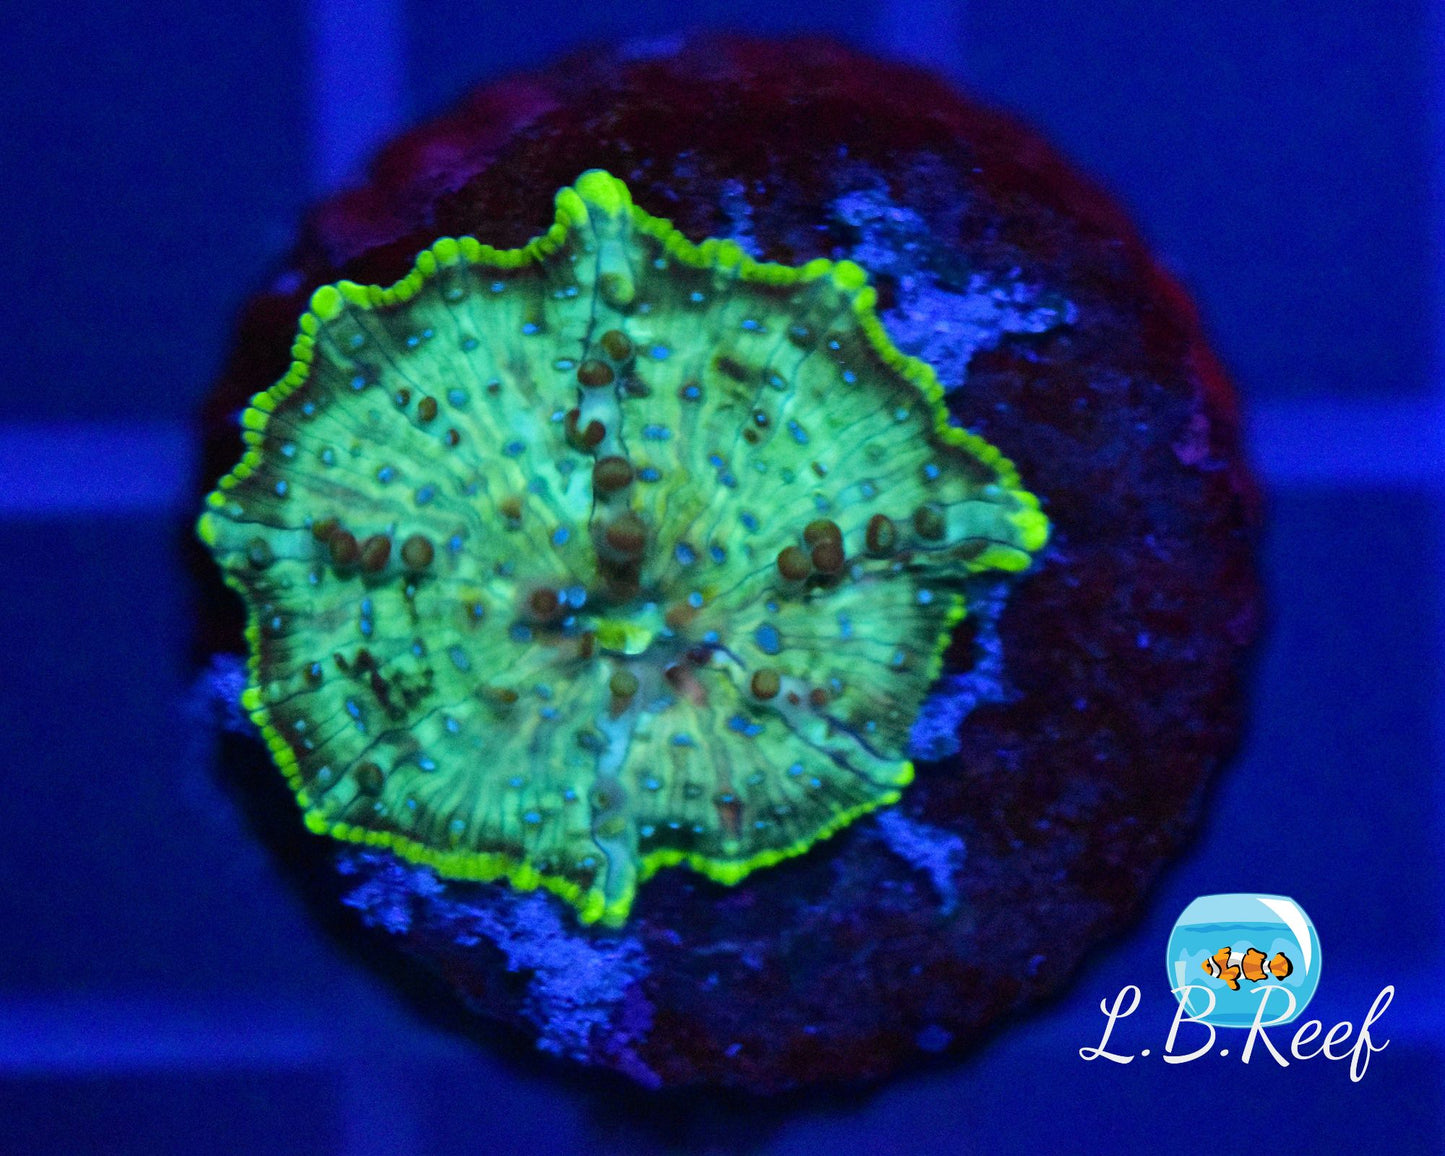 Discosoma sp. "Blue Spotted" - L.B.Reef